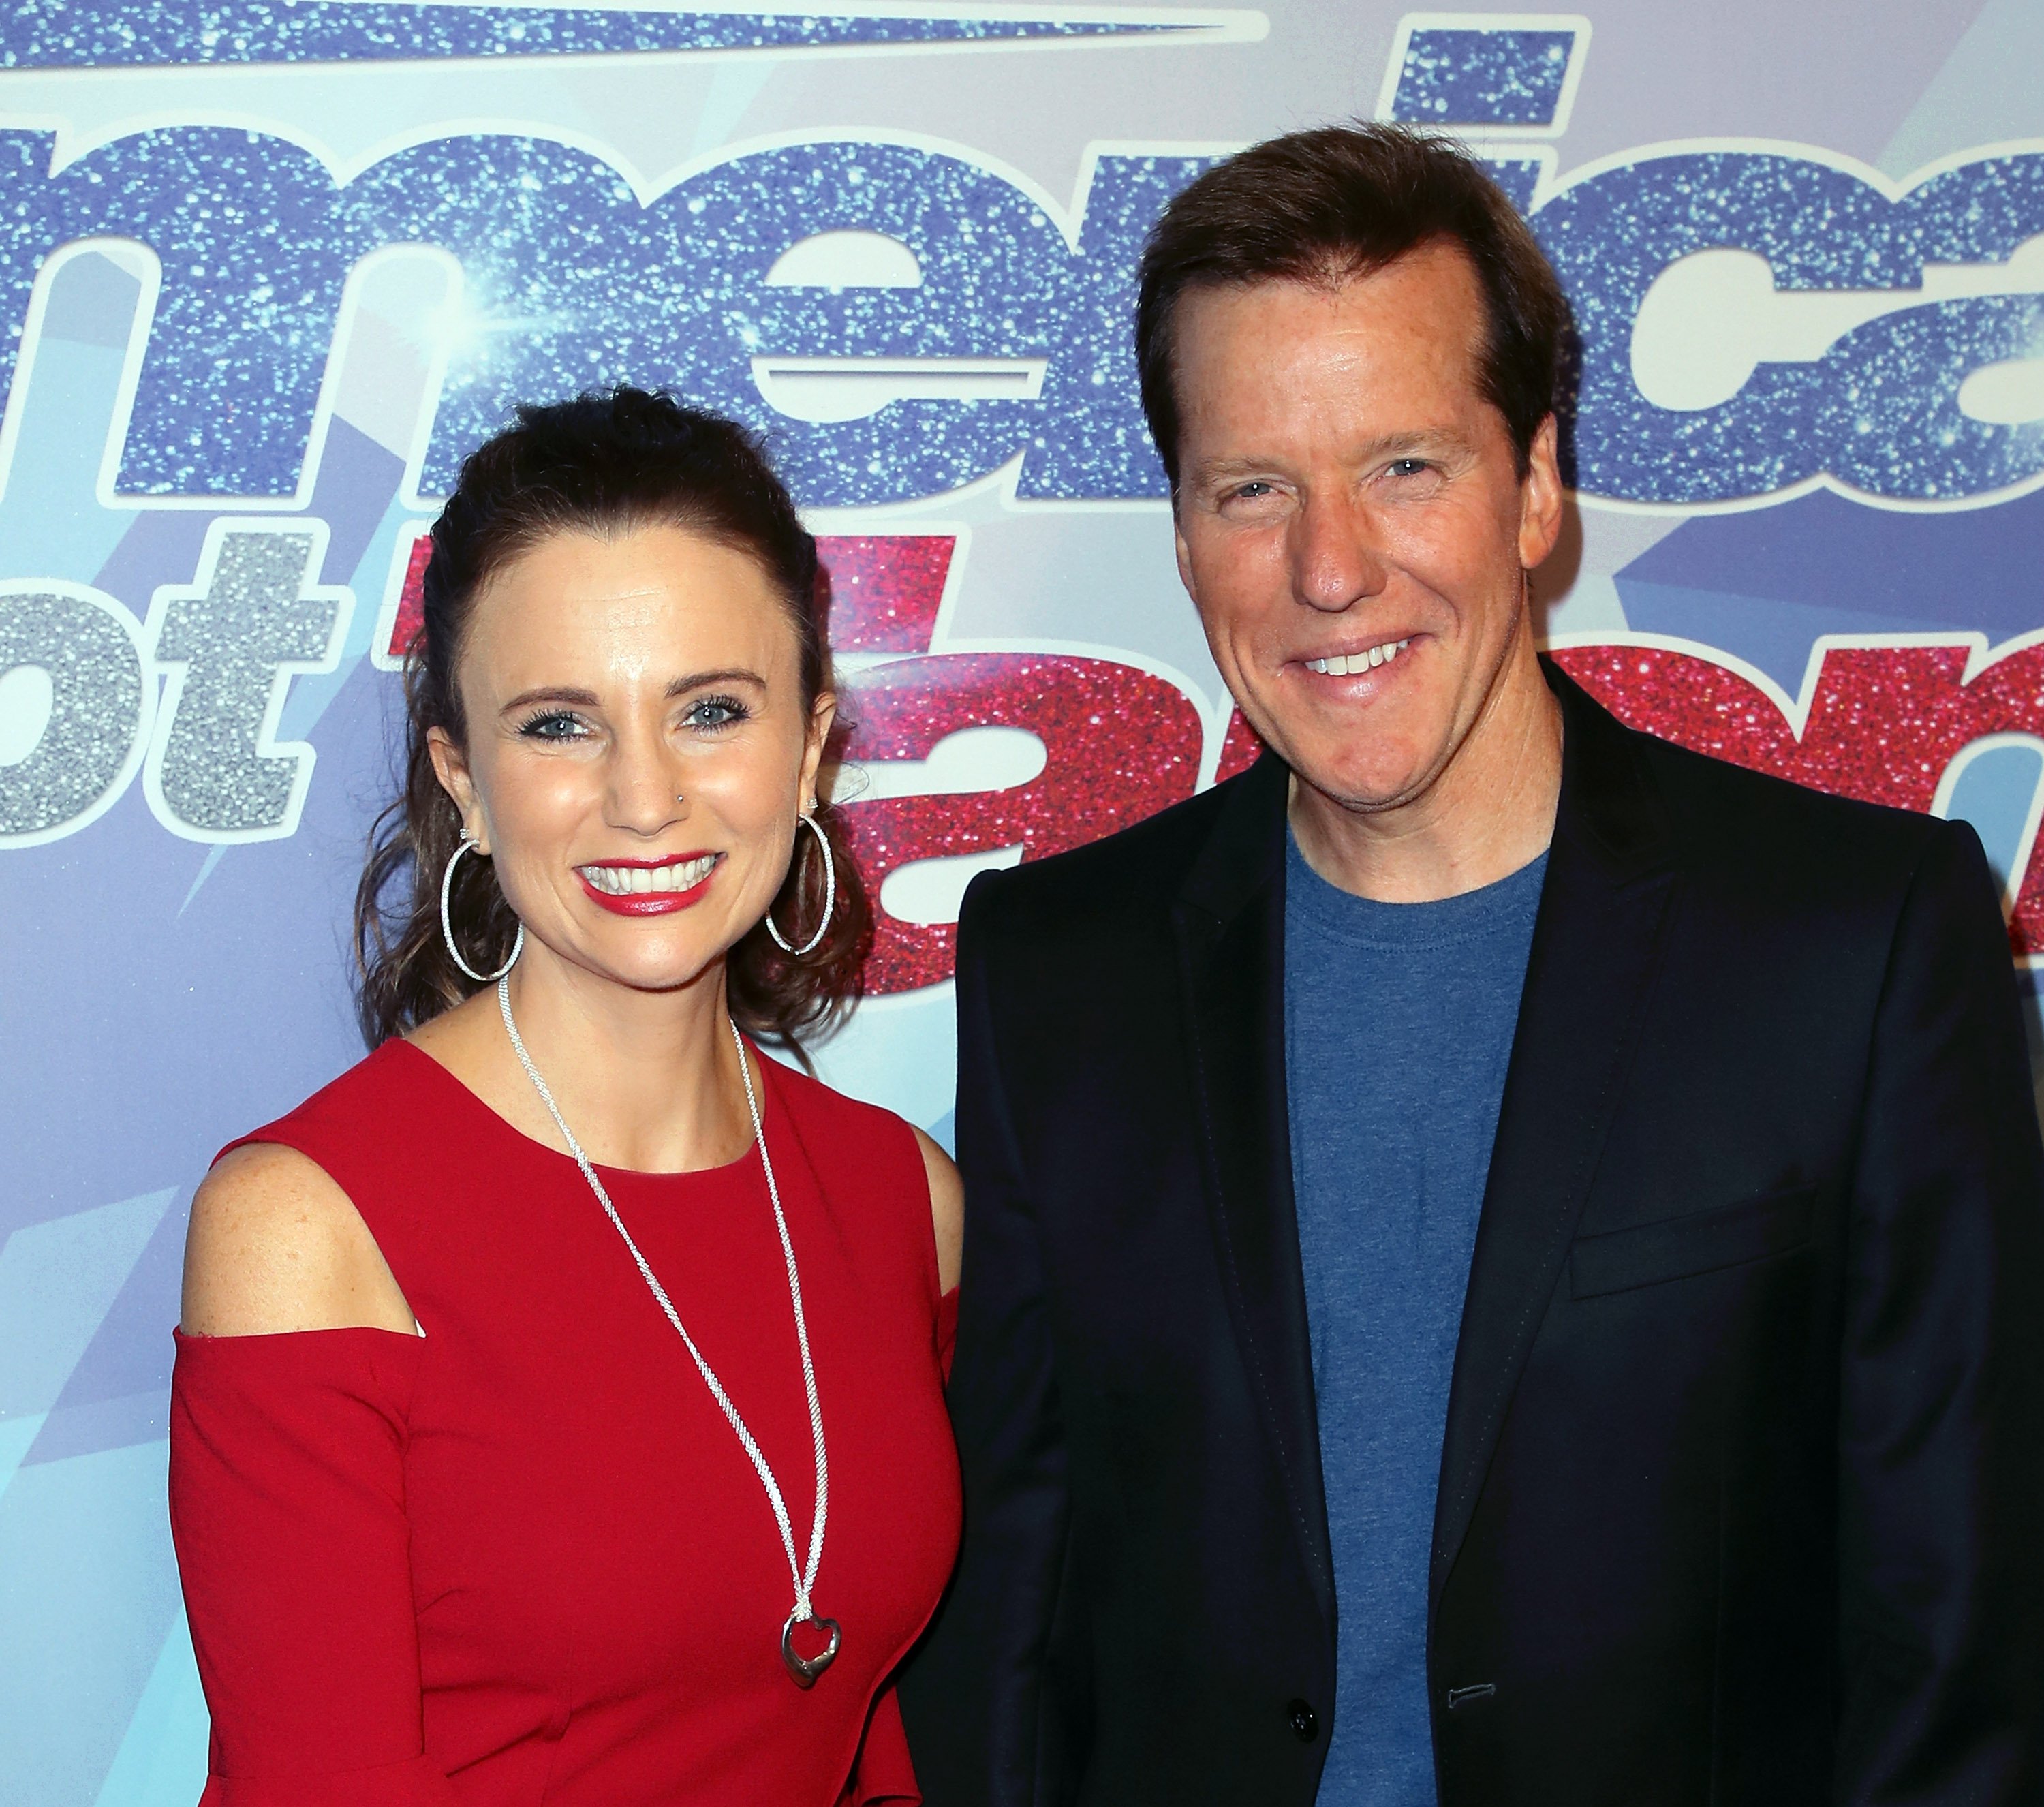 Audrey Murdick and Jeff Dunham at the NBC's "America's Got Talent" season 12 finale in Hollywood on September 20, 2017 | Source: Getty Images